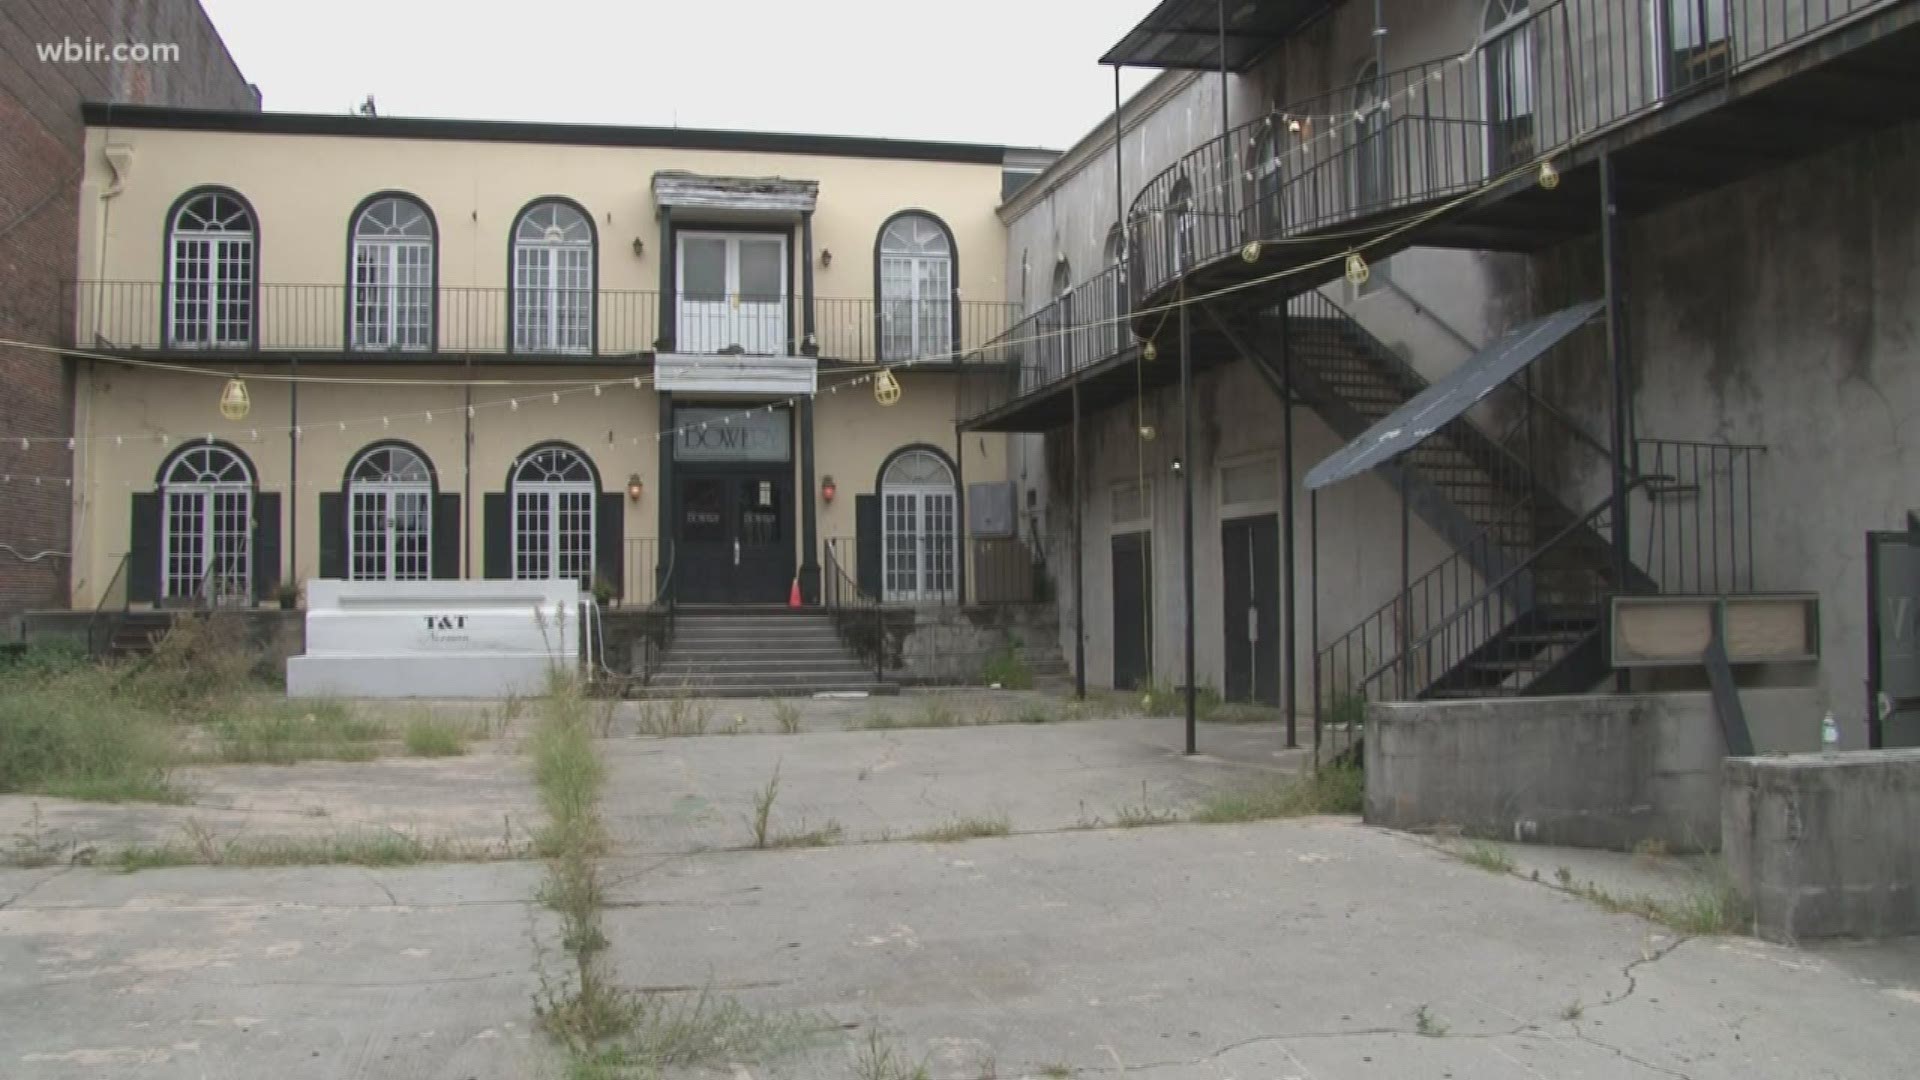 The property owners say as the old city changes - they're expecting booming business.